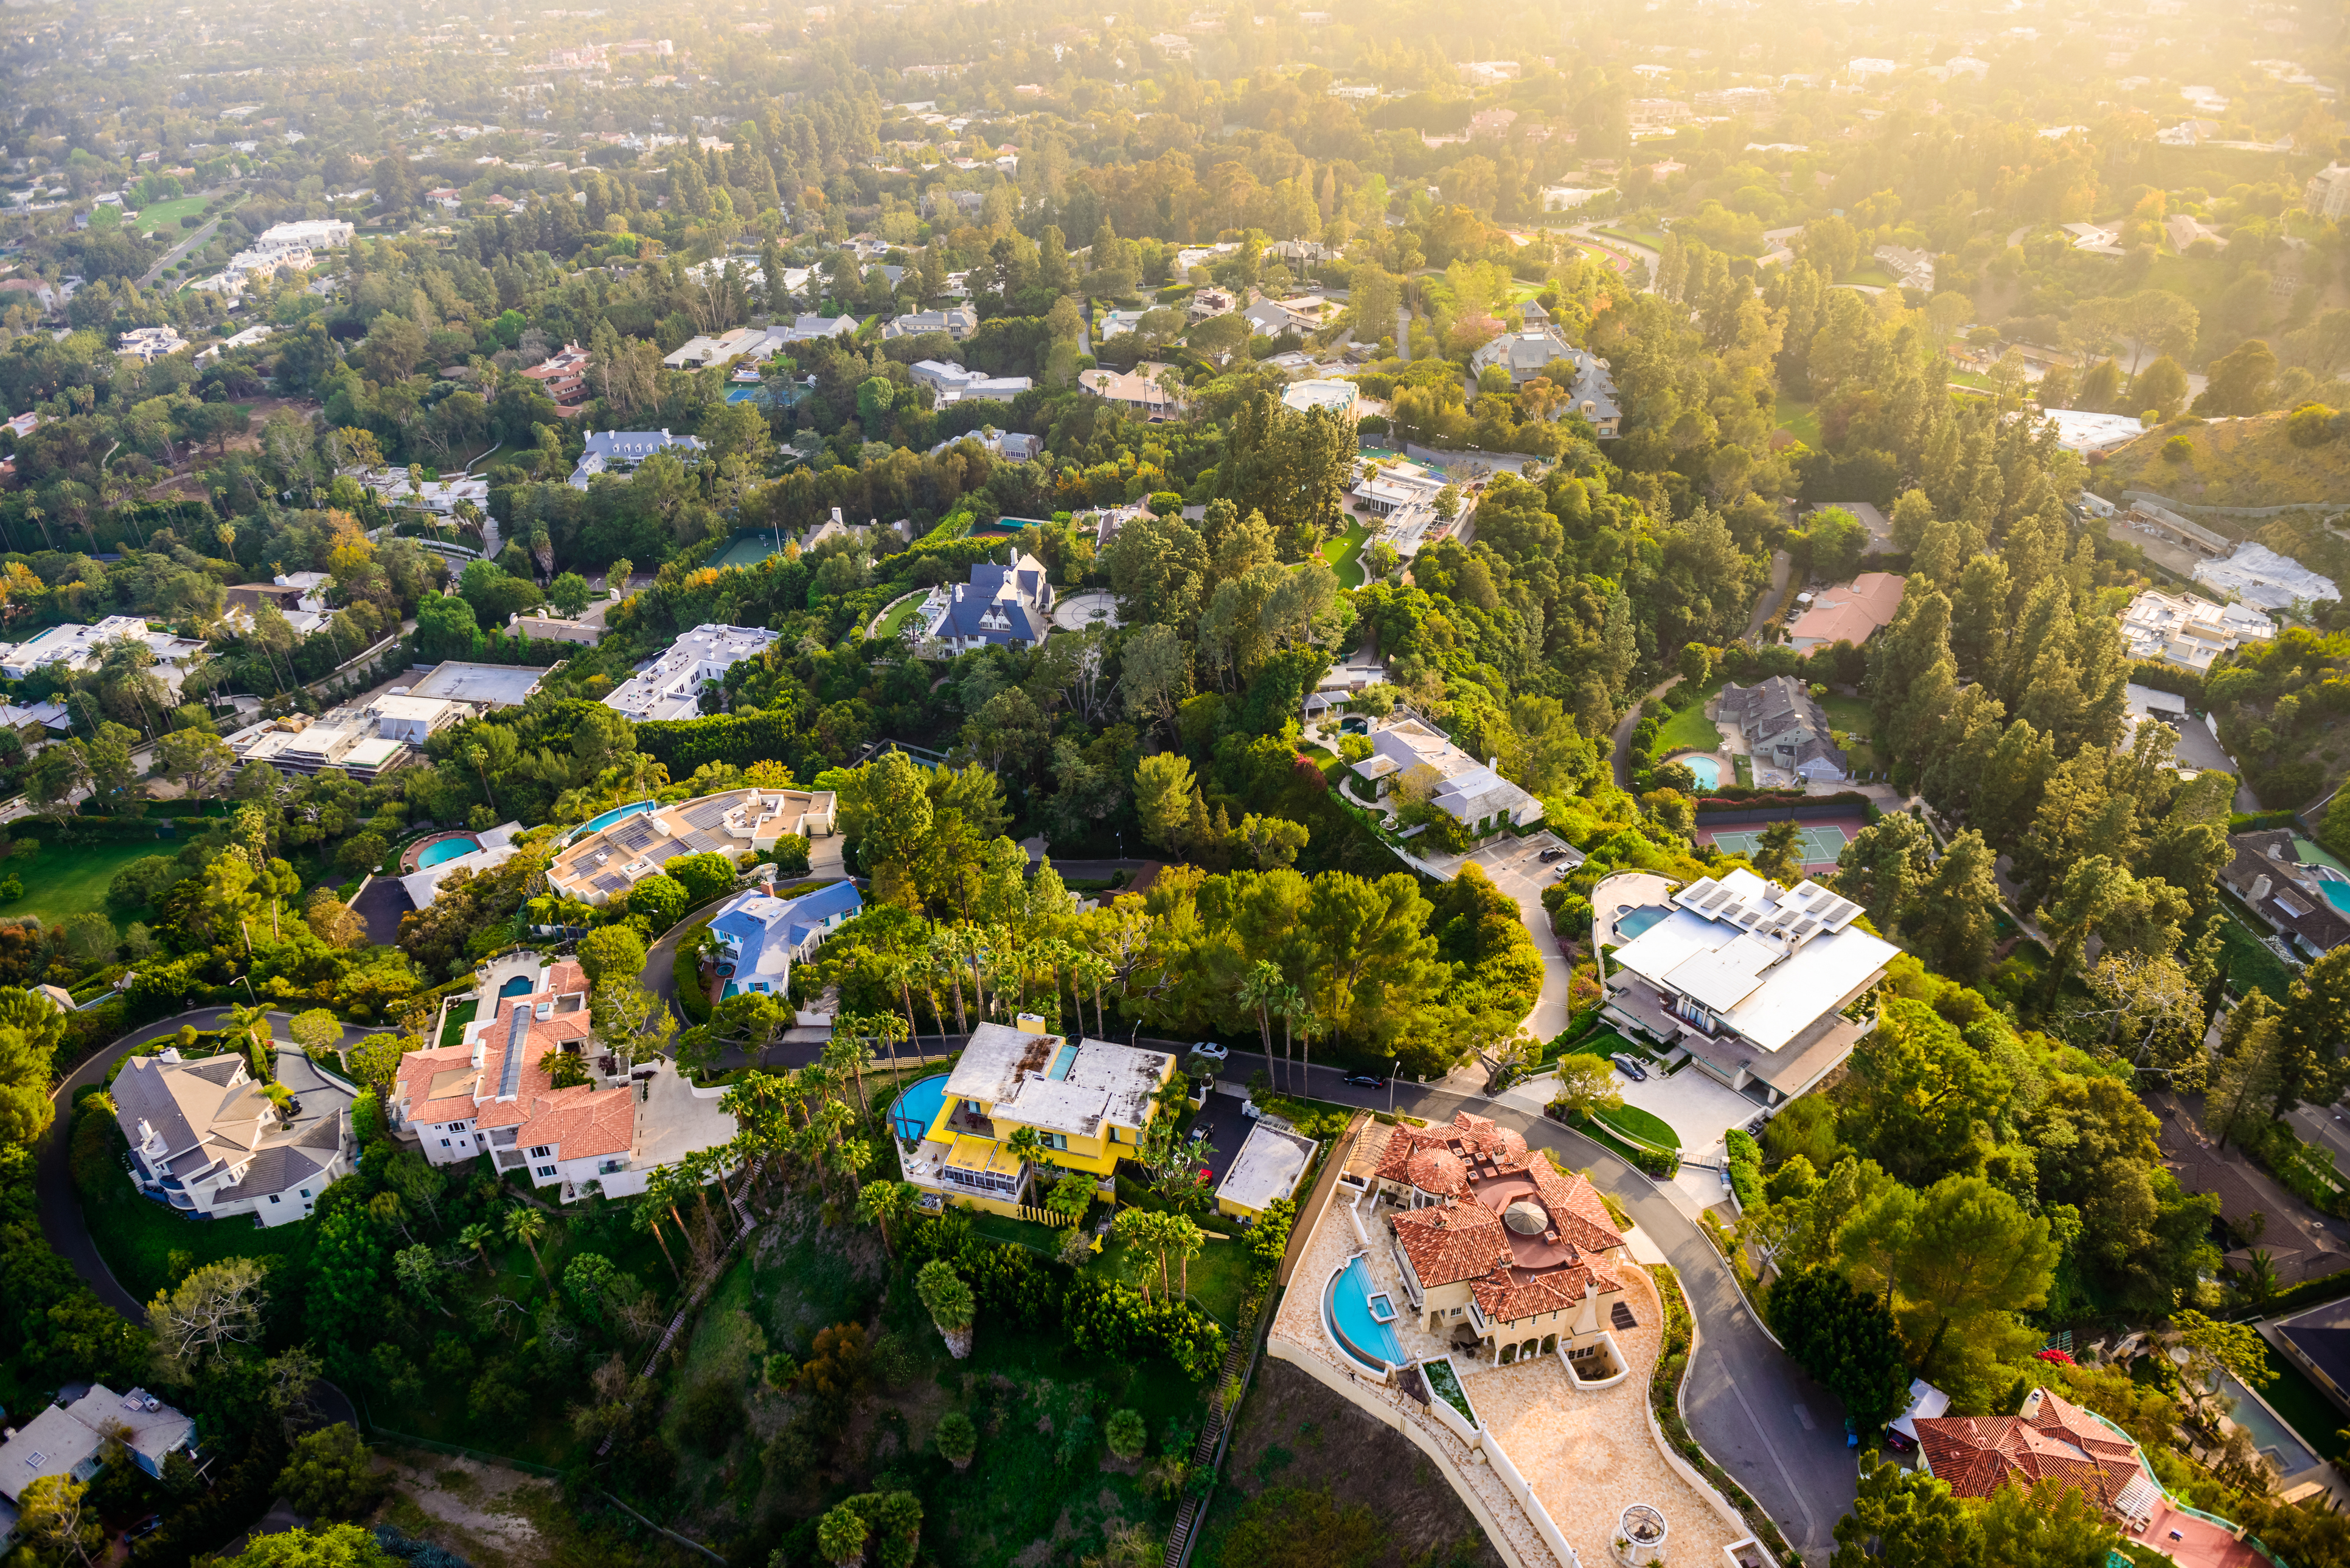 Aerial view of urban forest at sunset